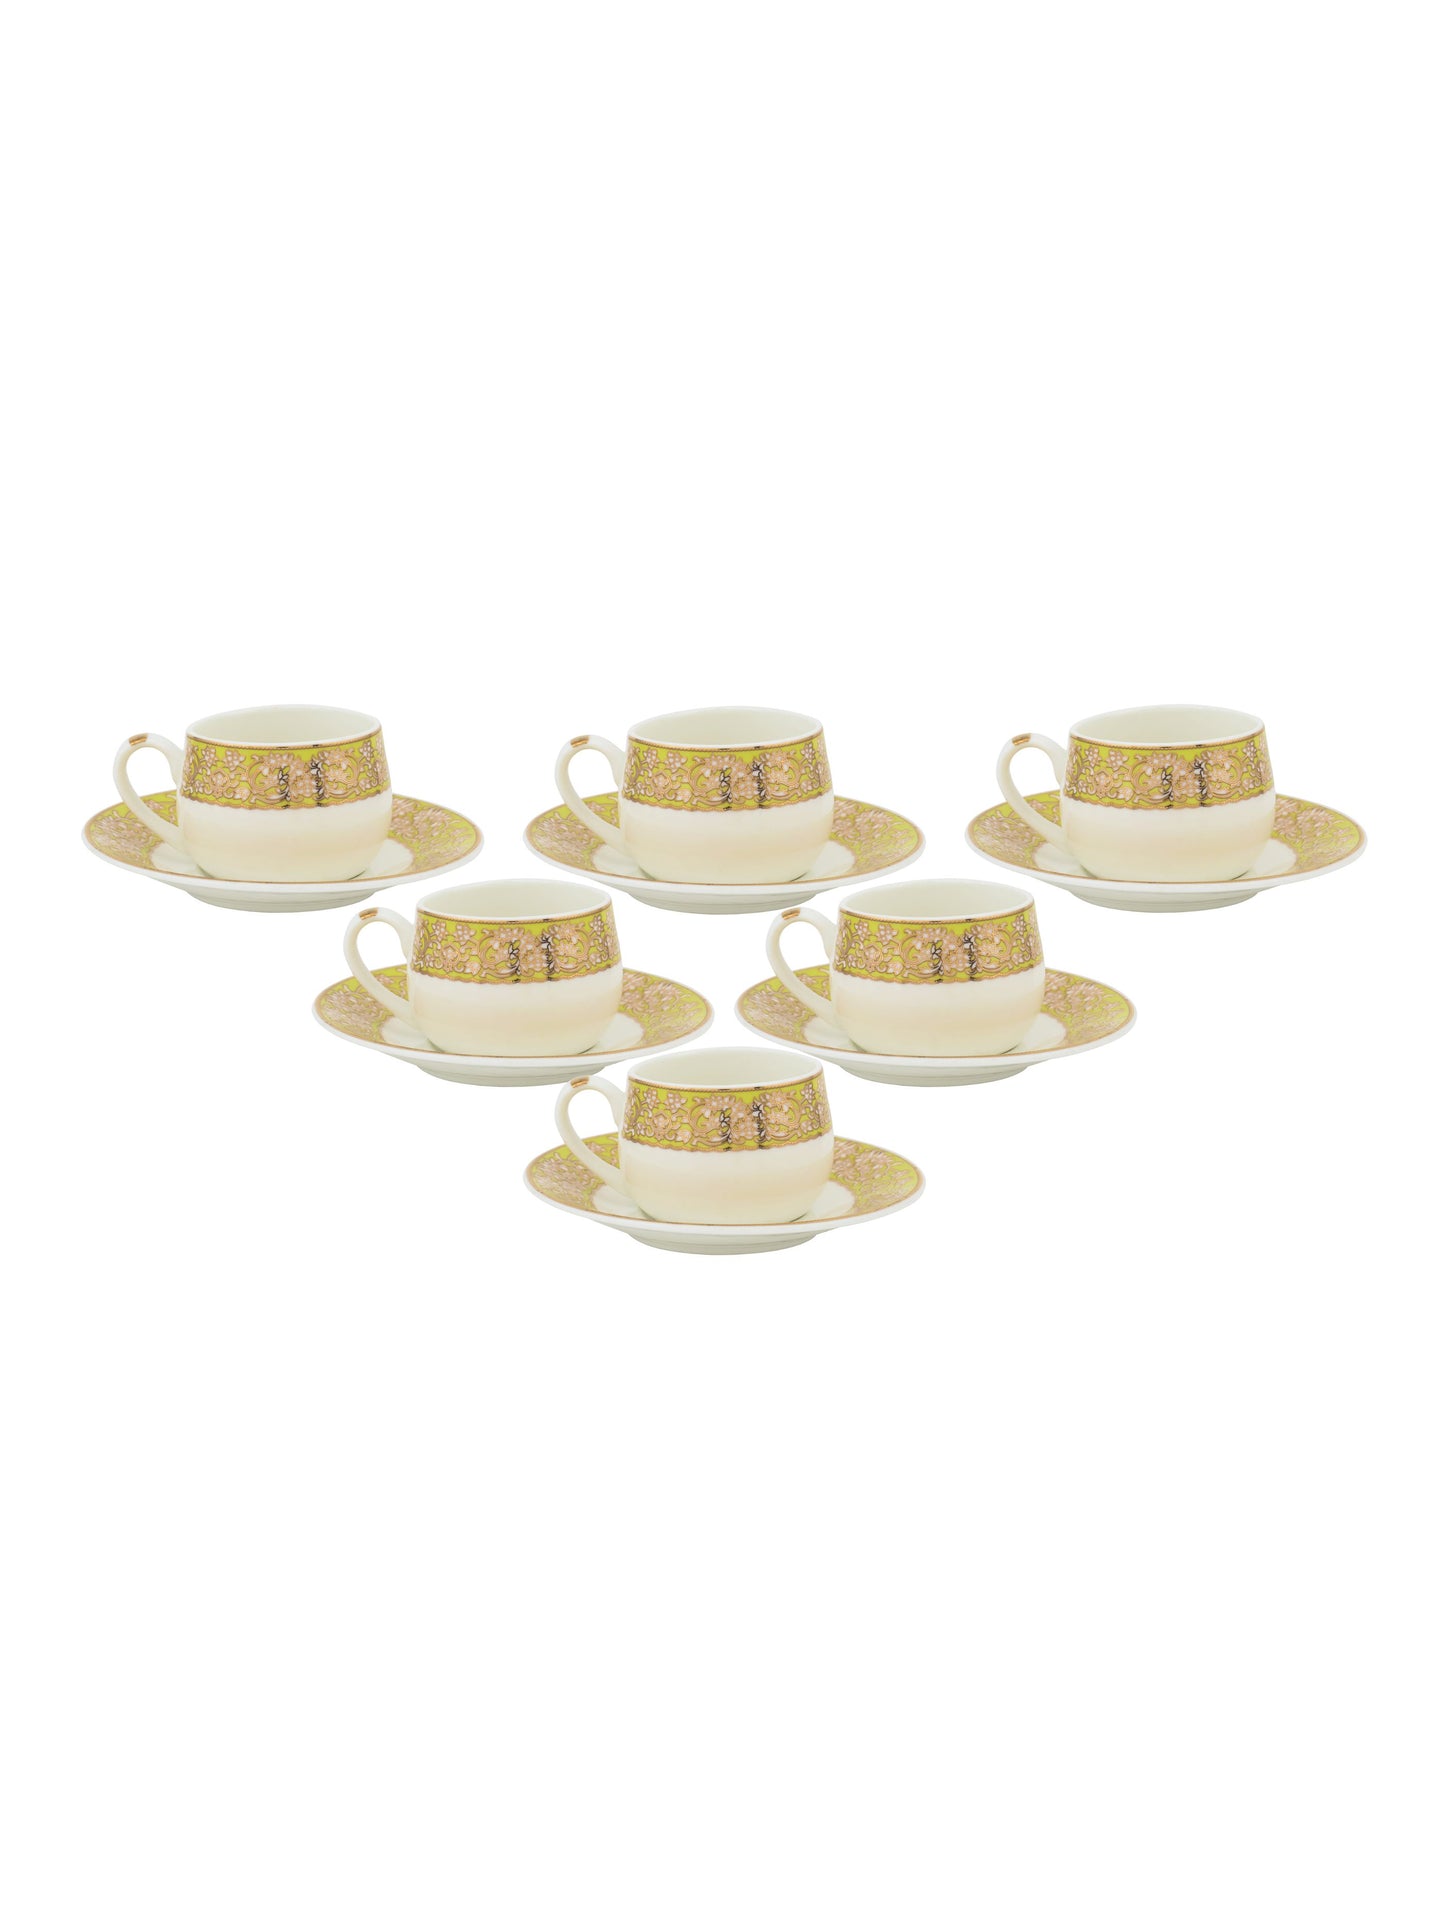 JCPL Coral Aroma Cup & Saucer, 145ml, Set of 12 (6 Cups + 6 Saucers) (AS1)